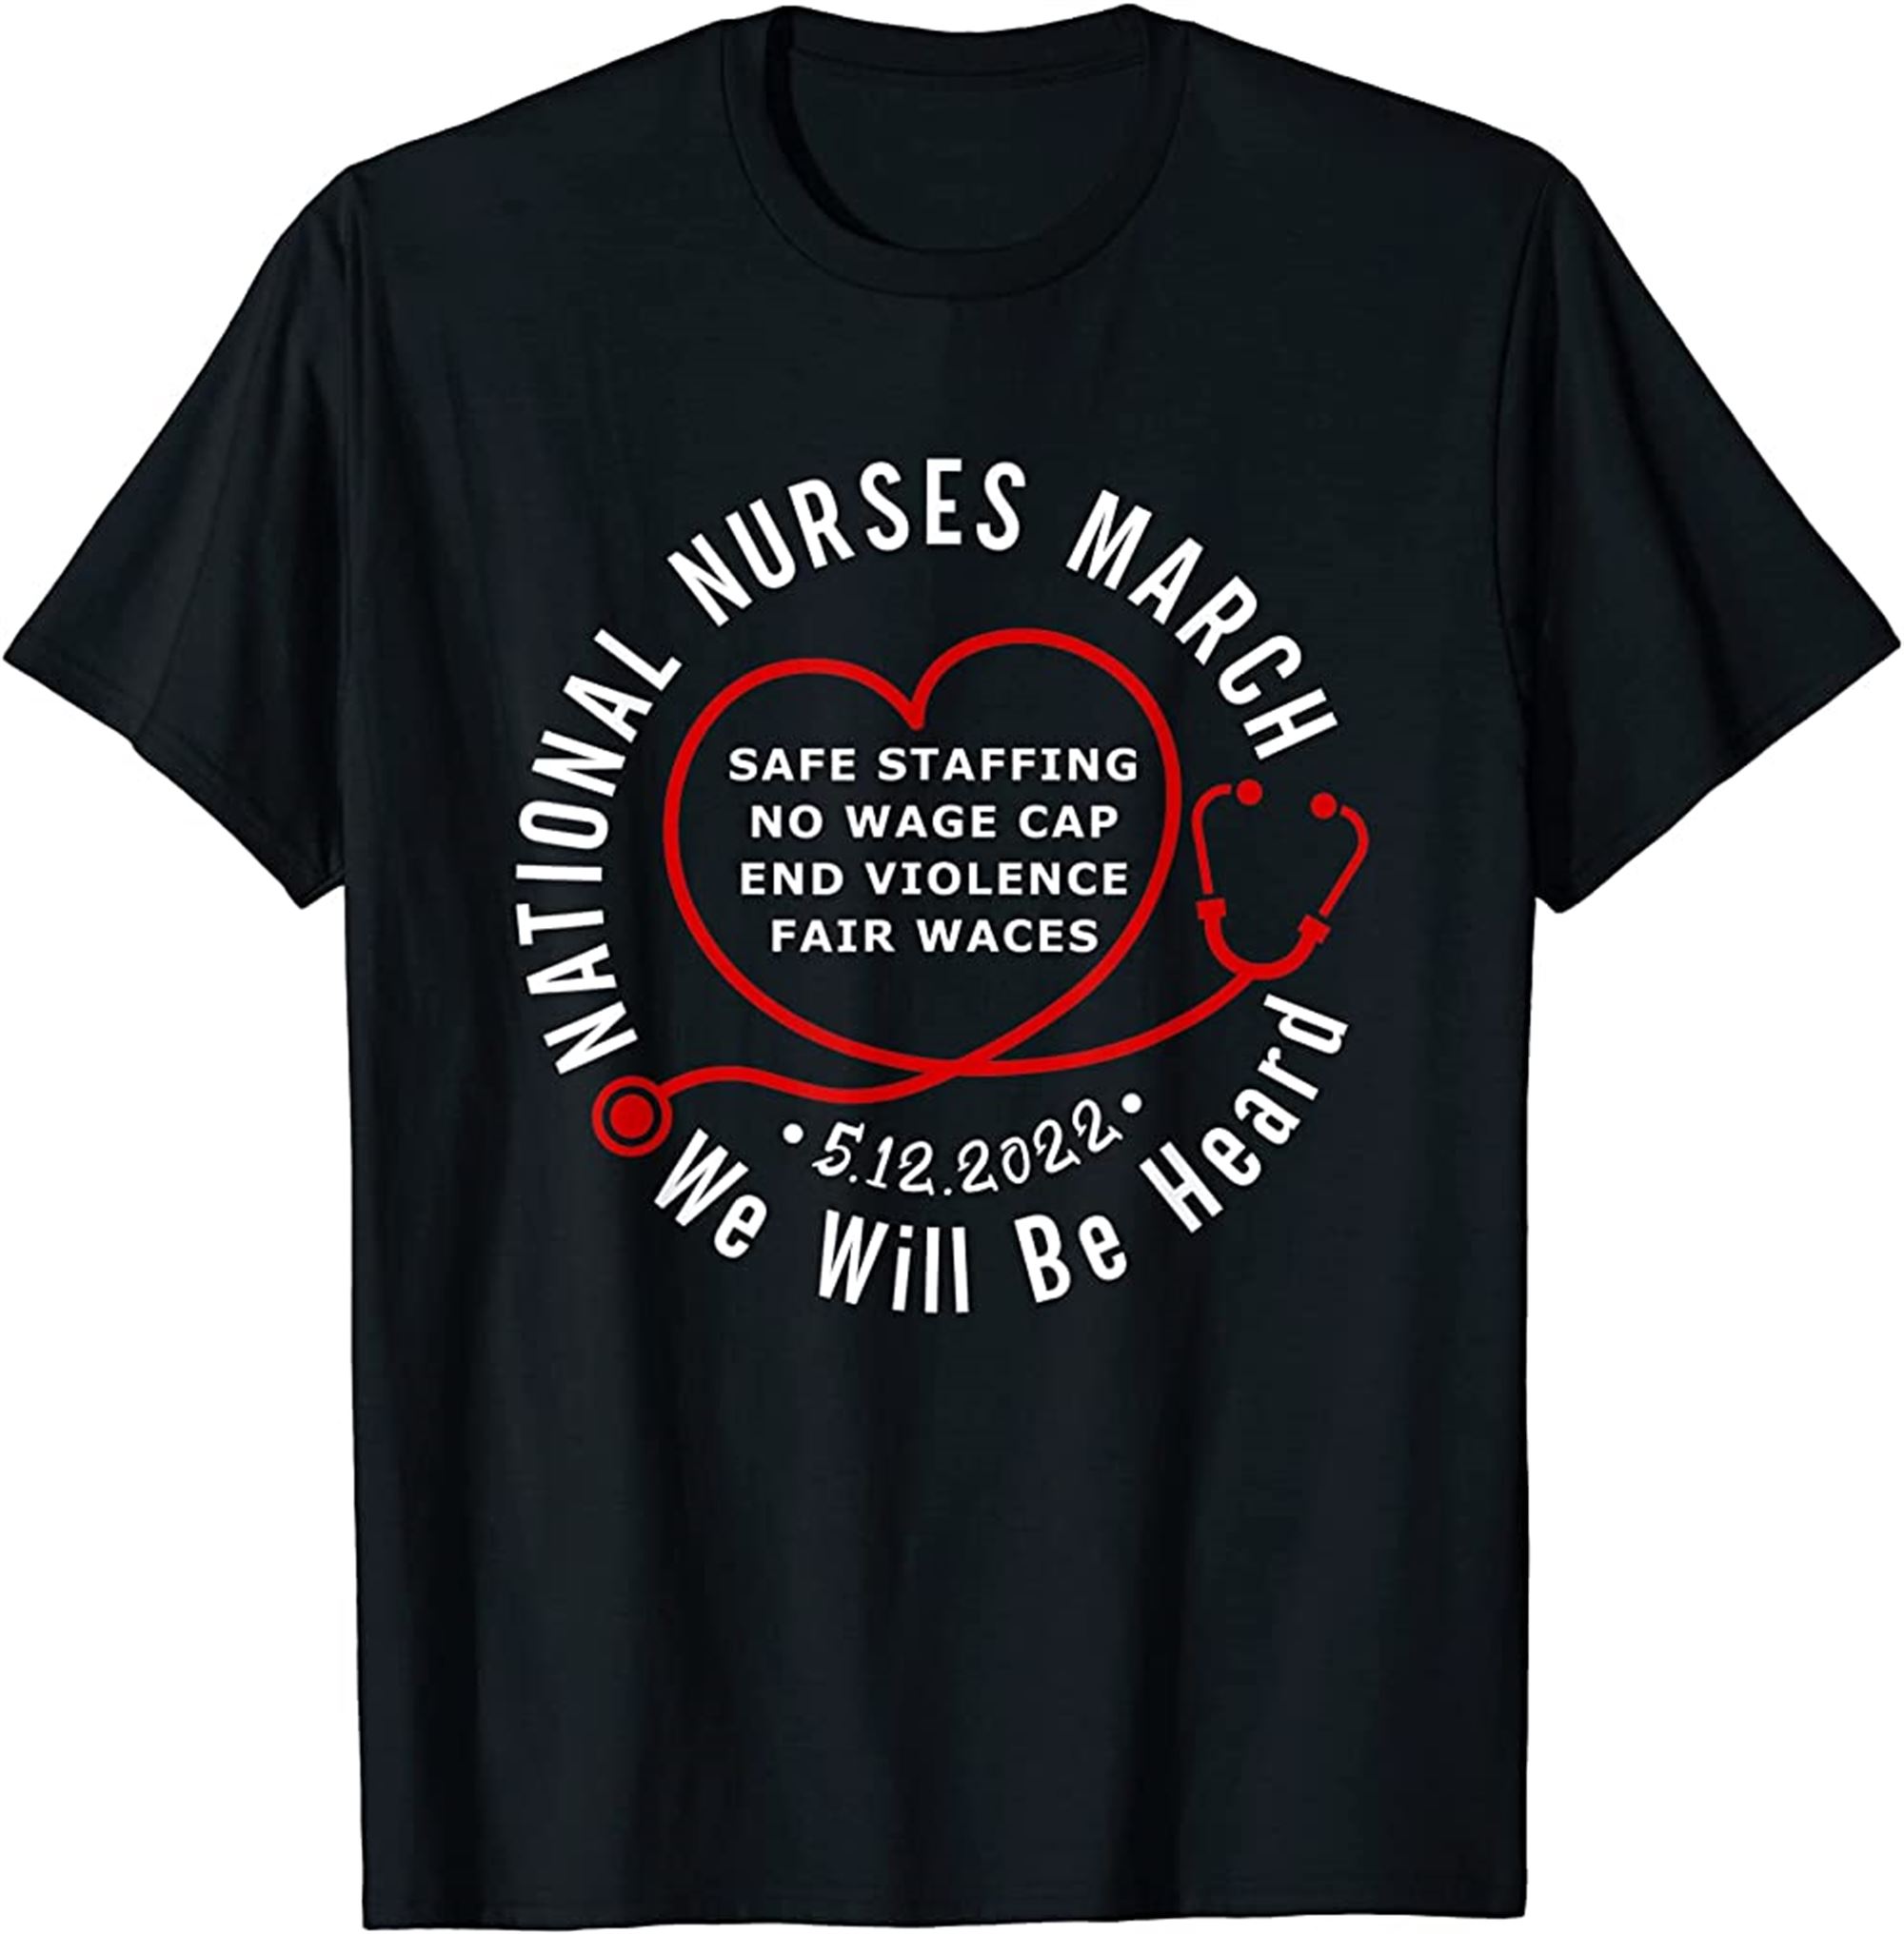 We Will Be Heard National Nurses March May Tshirt Full Size Up To 5xl